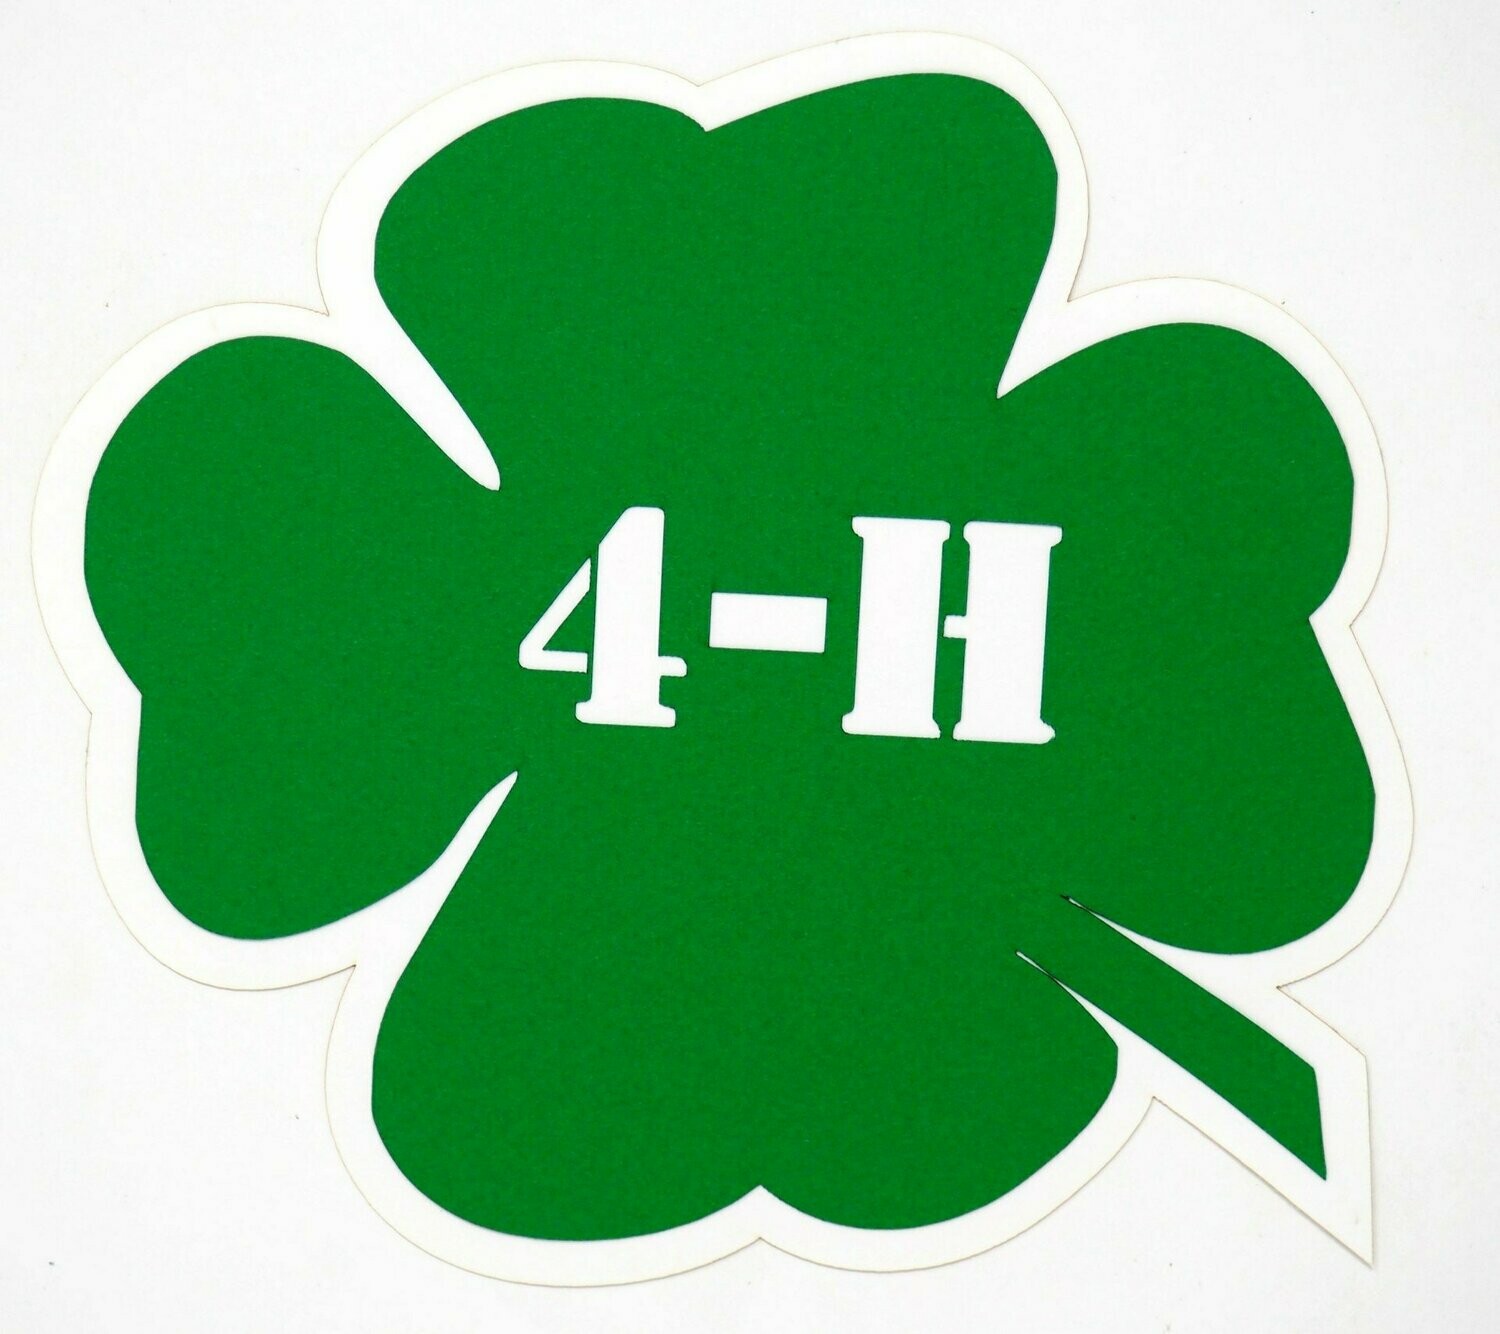 4-H Clover (with Shadow)